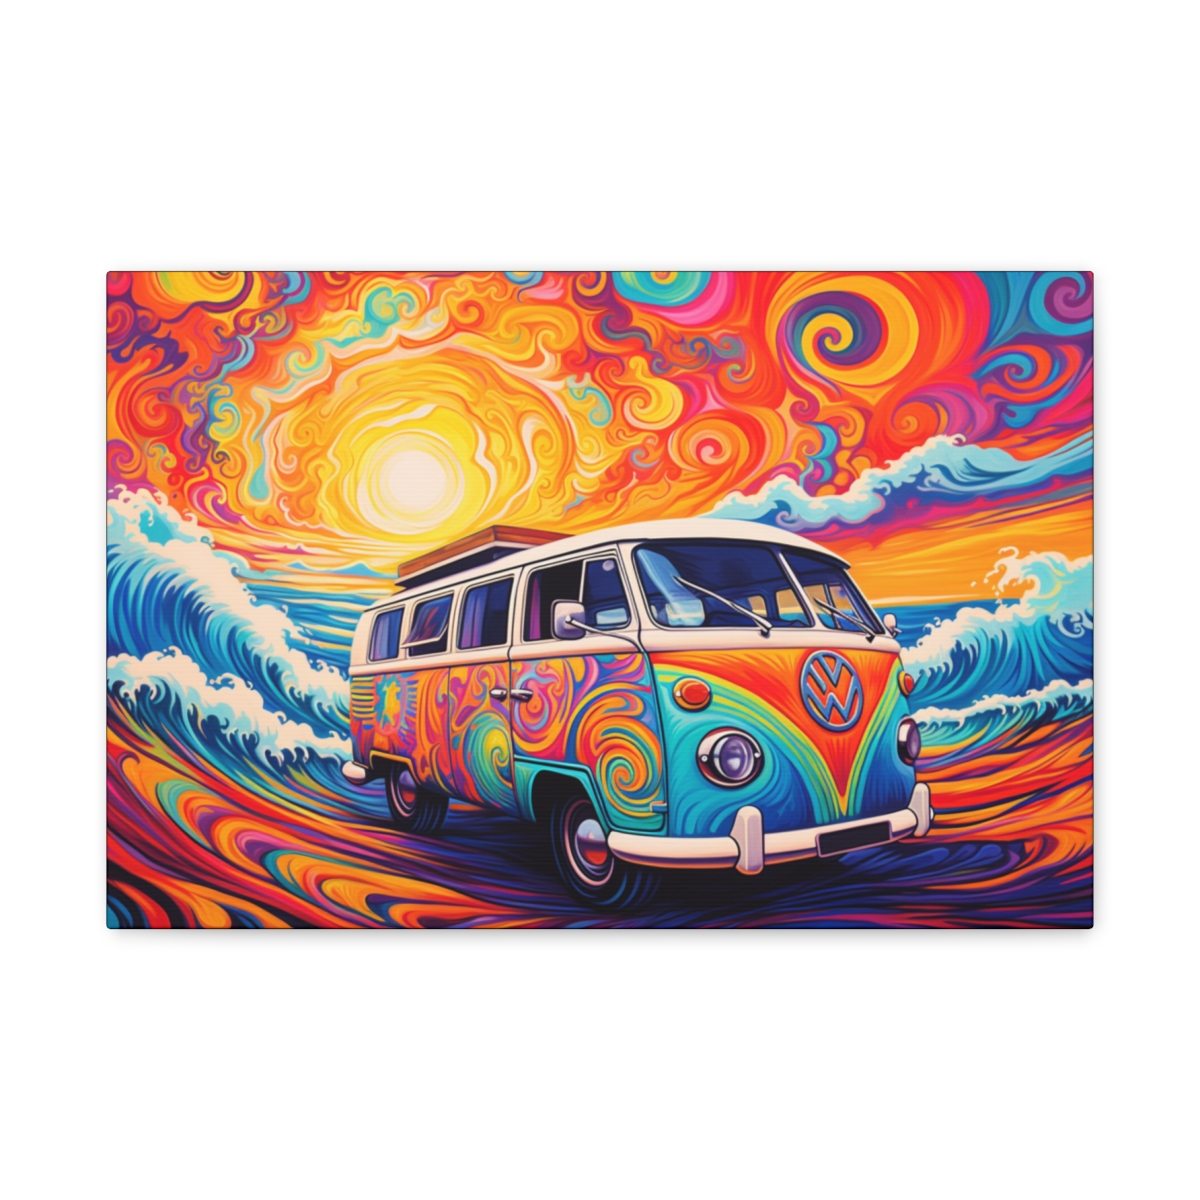 Hippie Van Art: Forget The So-called Rules